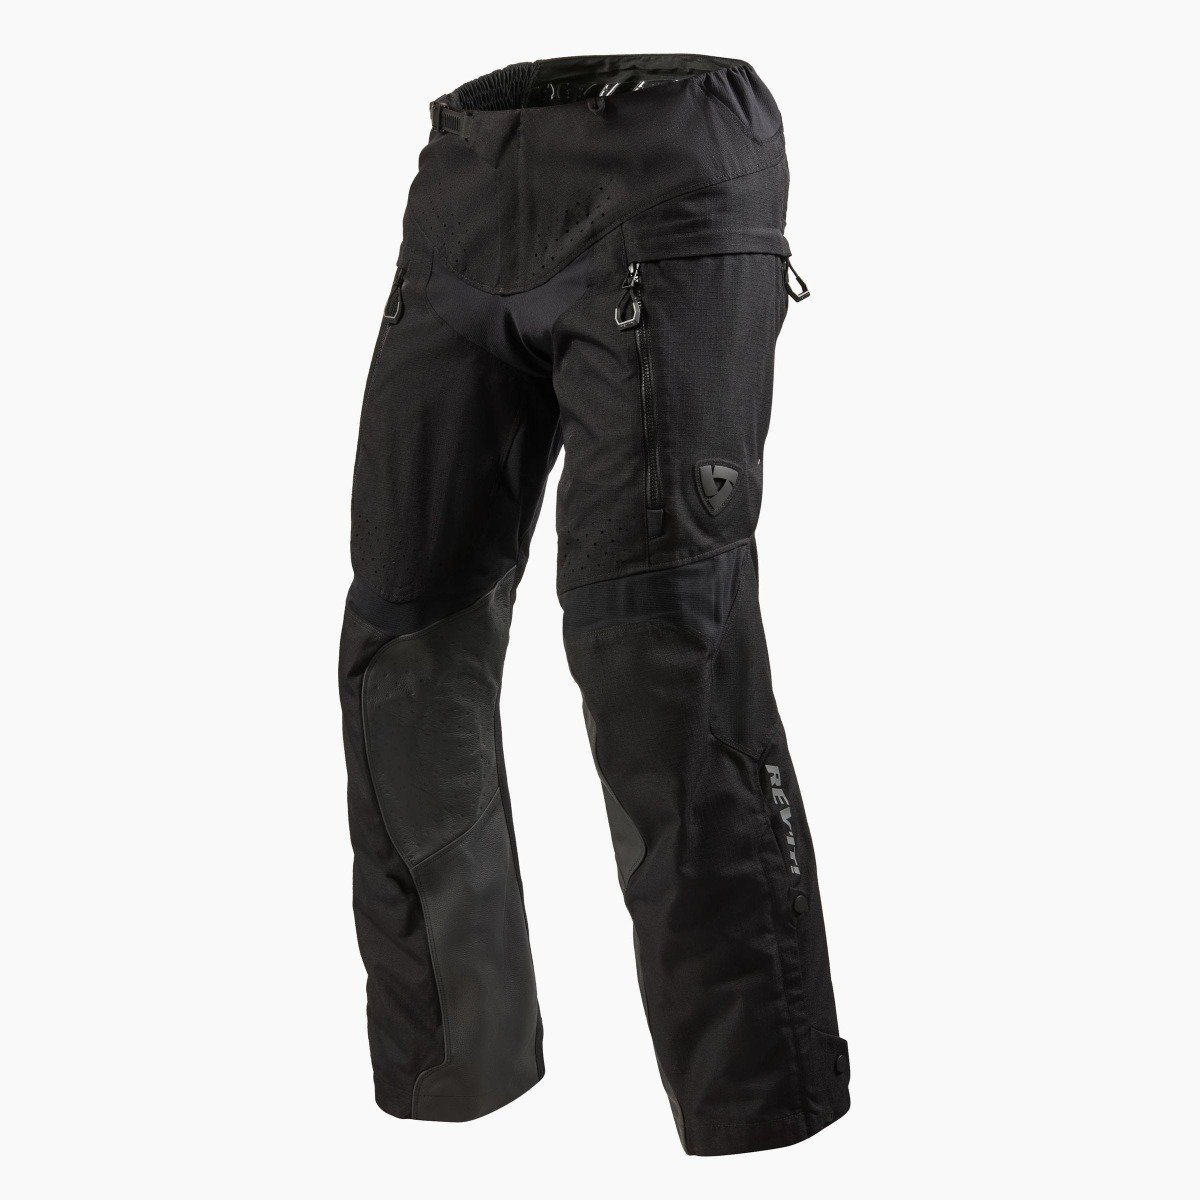 Image of REV'IT! Continent Black Motorcycle Pants Size 2XL ID 8700001297066